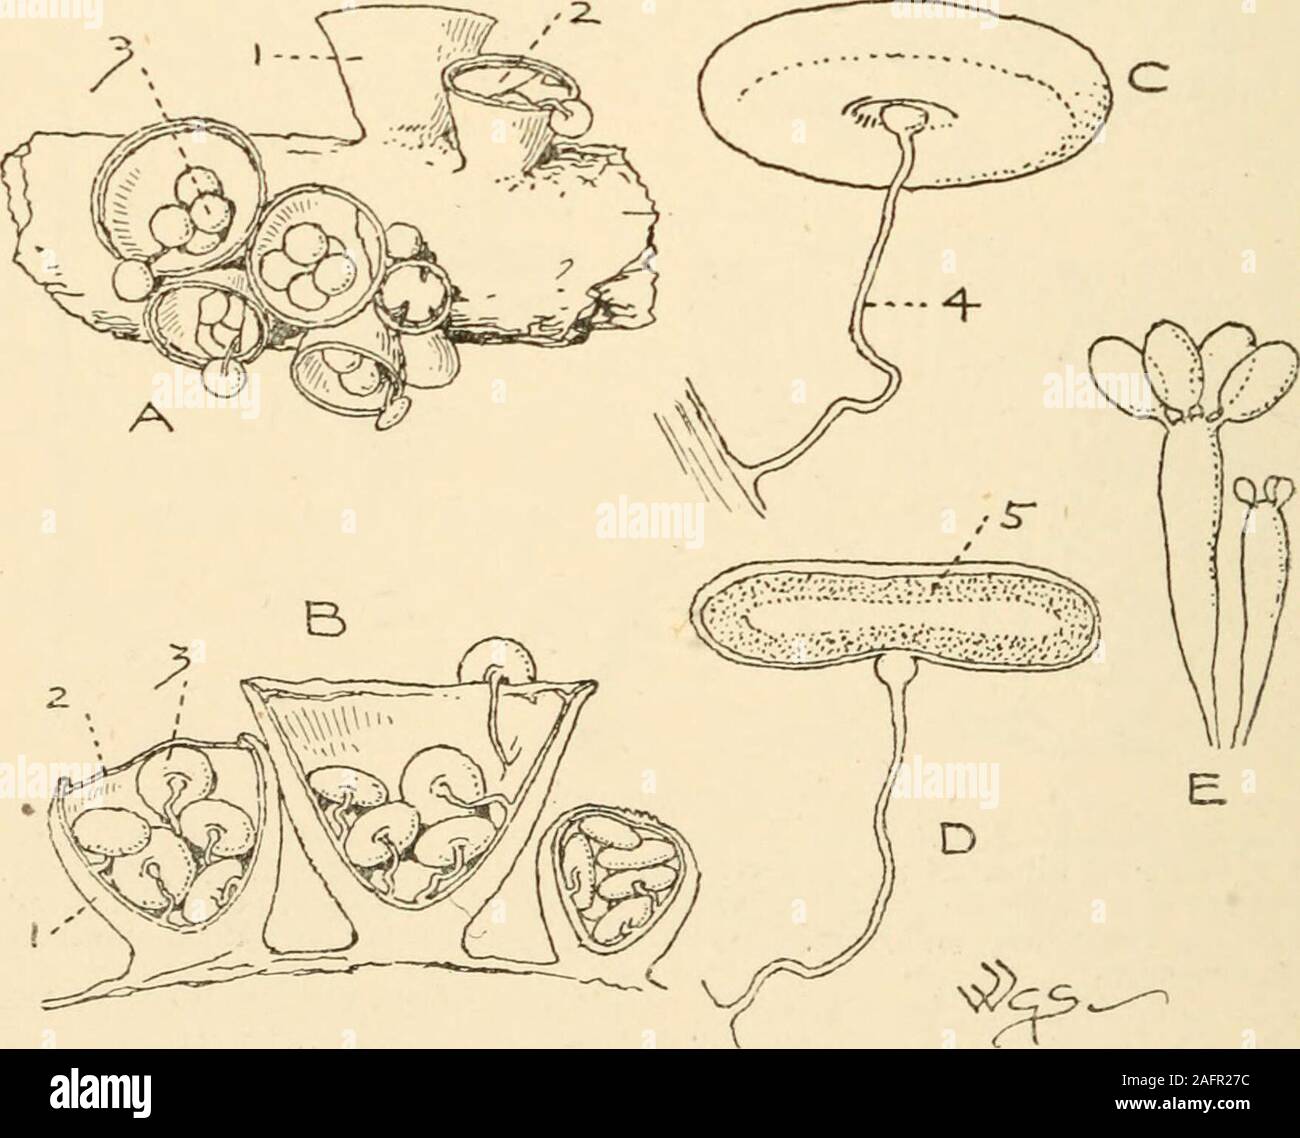 . Synopsis of the British Basidiomycetes ; a descriptive catalogue of the drawings and specimens in the Department of botany, British museum. riate and shining lead-colour within, hirto-tomentose and ferruginous without. Peri.subcircular, biconvex, lead-colour. Fun. whitish, containinga long filiform appendage within. Springing from coarsebrown Myc.Fasciculate. Fields, woods, gardens, decaying twigs, wood, old willow, fir- cones, coco-nut fibre. Feb.-Nov. in. 2091. C. vernieosus DC. (from the silky-shining outer surface of the peridium; vernieosus, shiny as though varnished) a b e. Campanulate Stock Photo